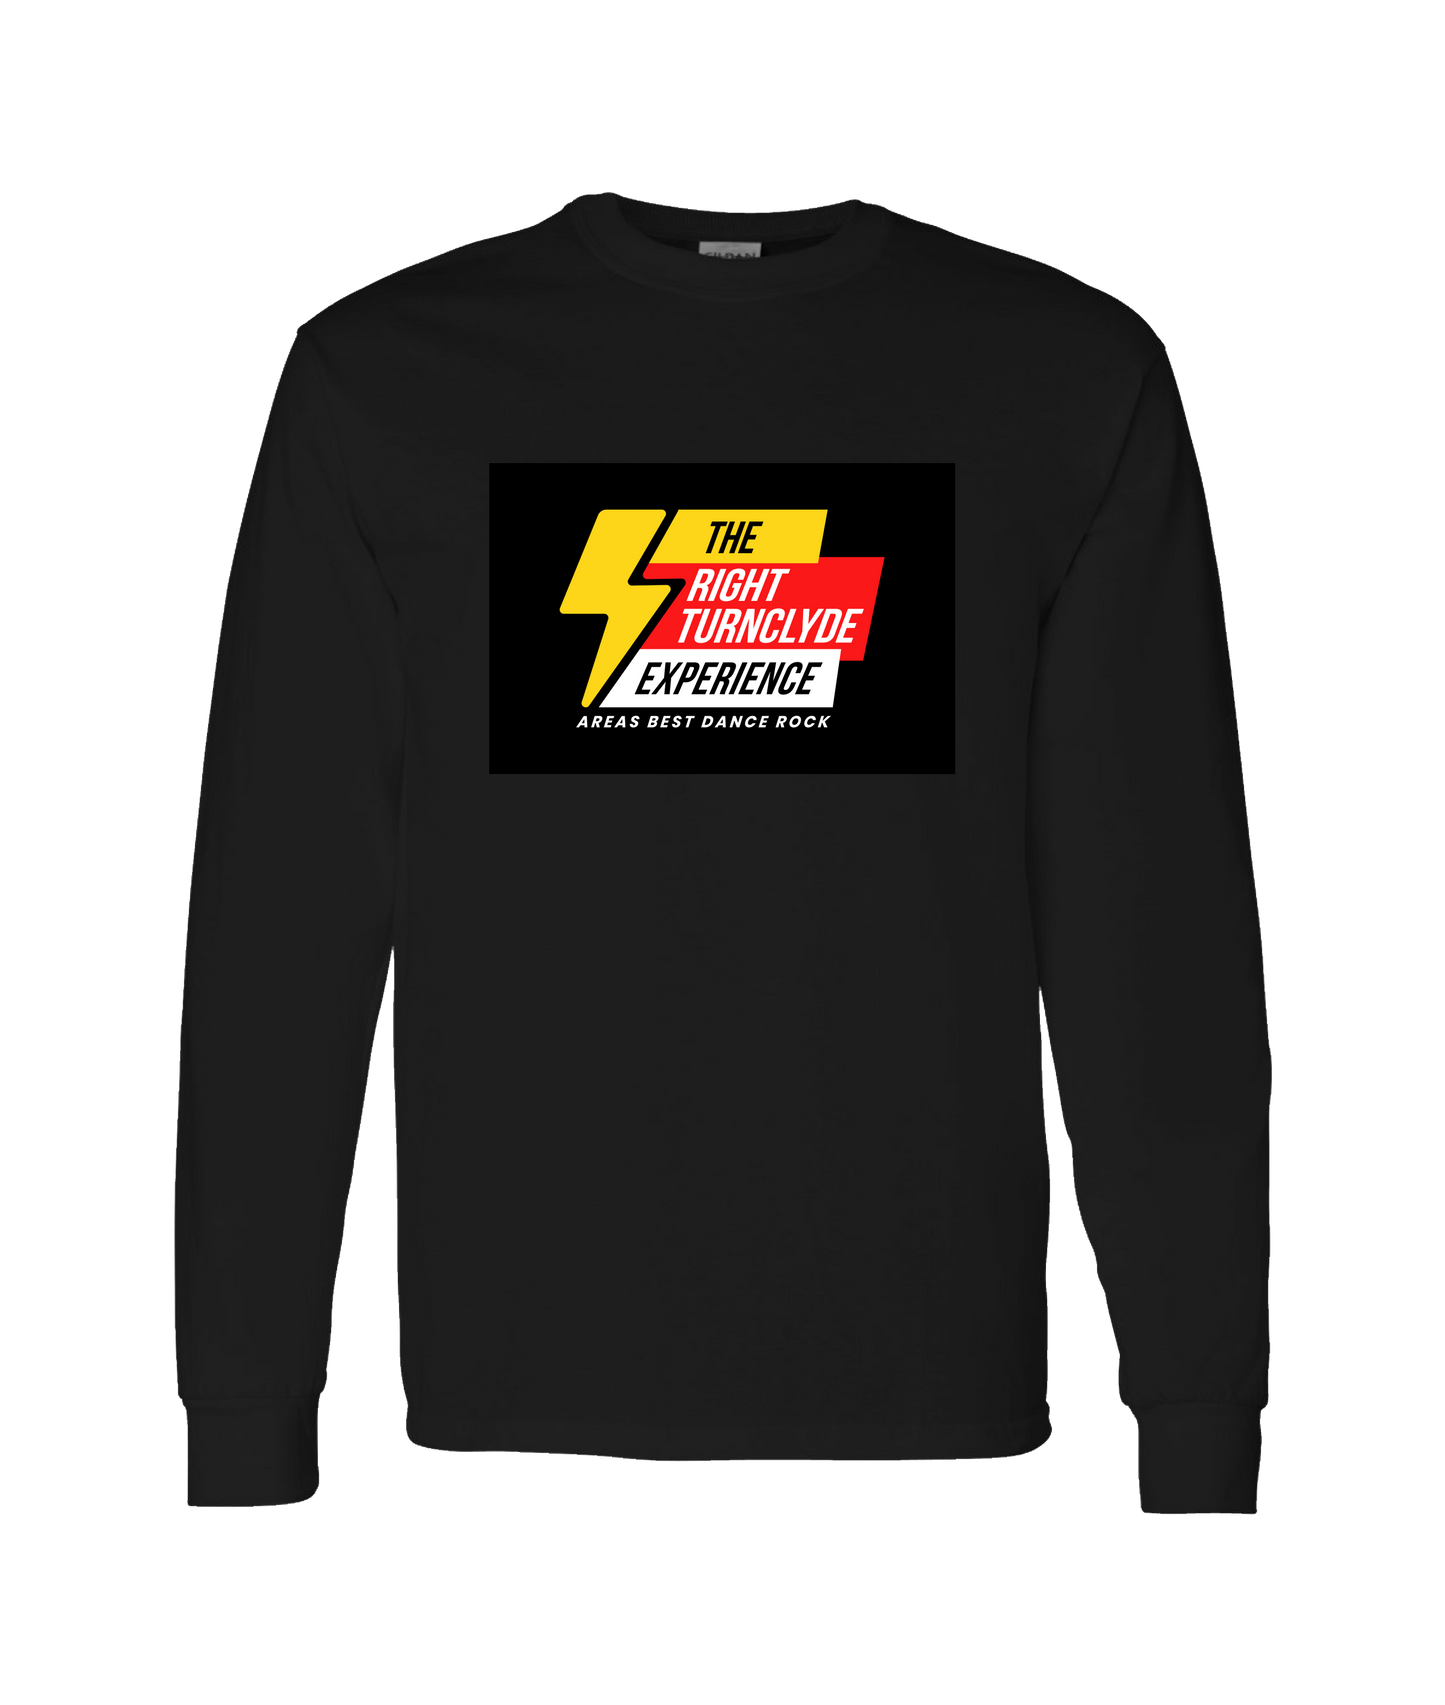 Right TurnClyde "Brucie Gear" Merchandise - The Experience - Black Long Sleeve T